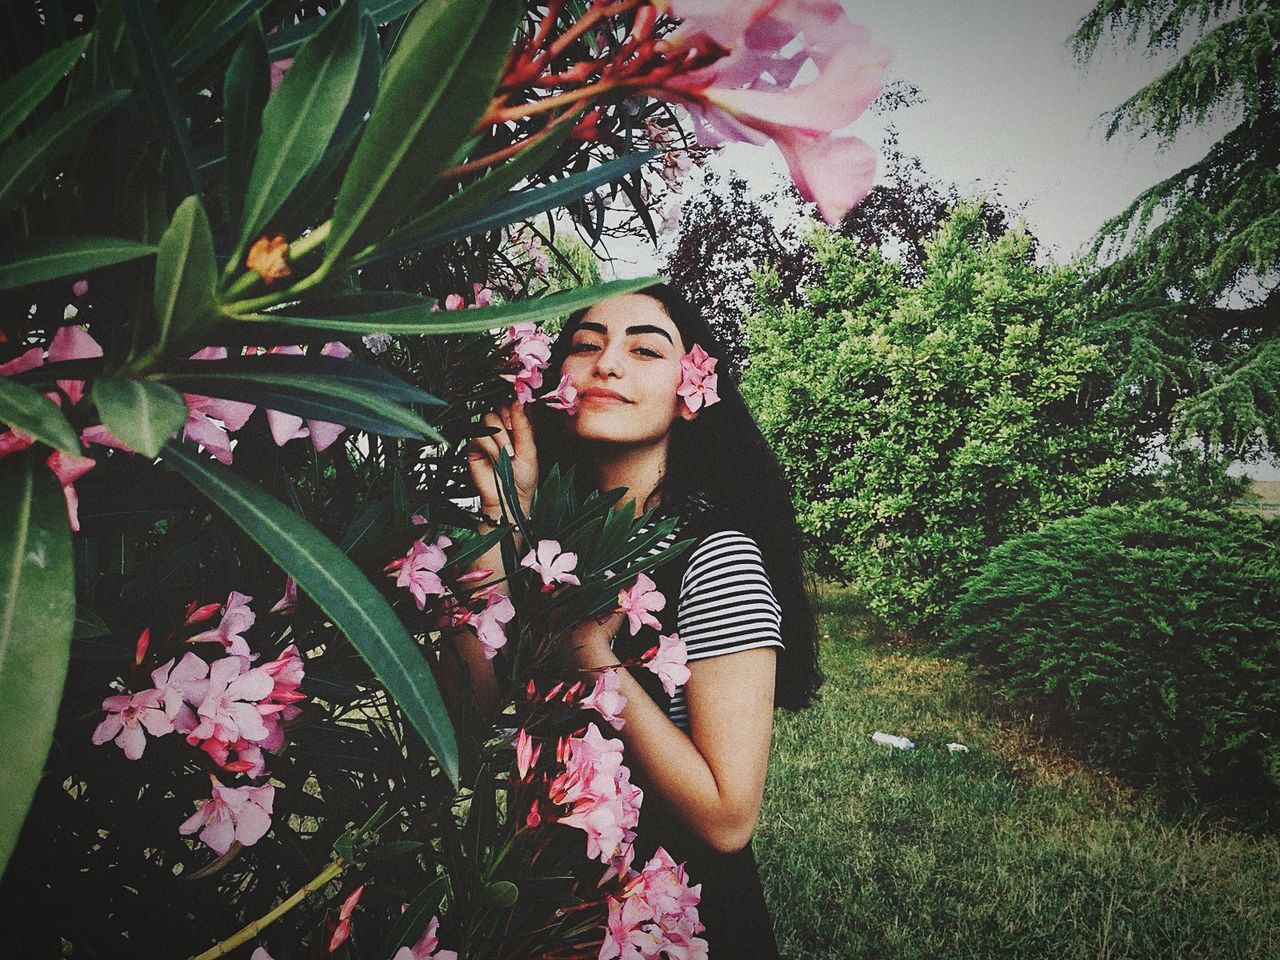 plant, growth, flower, one person, flowering plant, young adult, leisure activity, real people, young women, lifestyles, beauty in nature, nature, standing, fragility, casual clothing, vulnerability, freshness, day, leaf, beautiful woman, outdoors, hairstyle, flower head